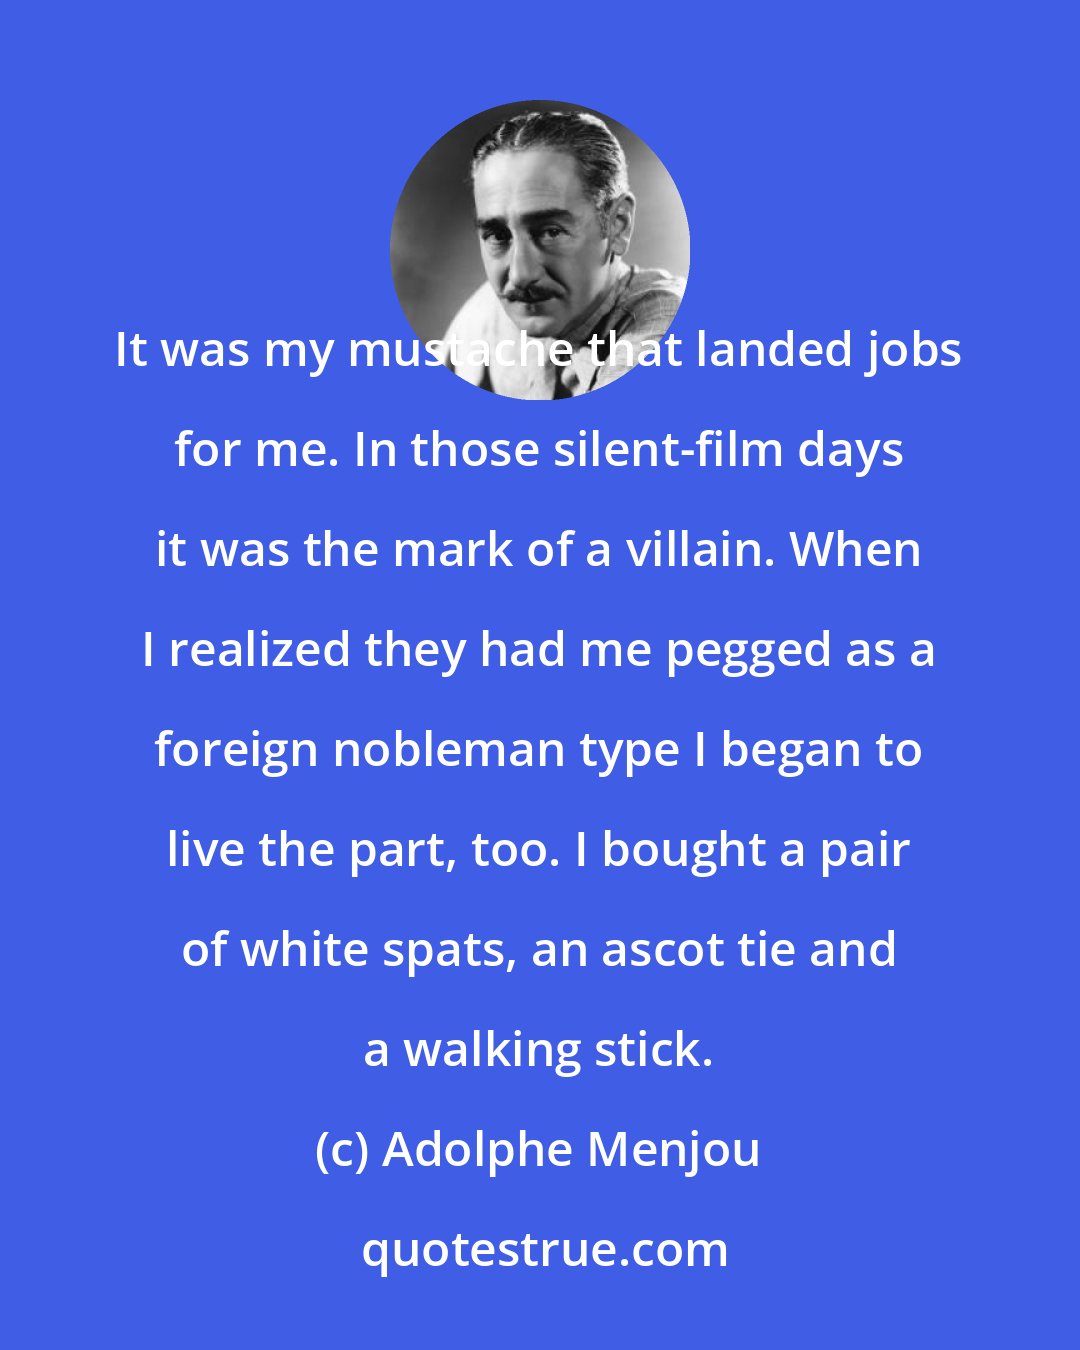 Adolphe Menjou: It was my mustache that landed jobs for me. In those silent-film days it was the mark of a villain. When I realized they had me pegged as a foreign nobleman type I began to live the part, too. I bought a pair of white spats, an ascot tie and a walking stick.